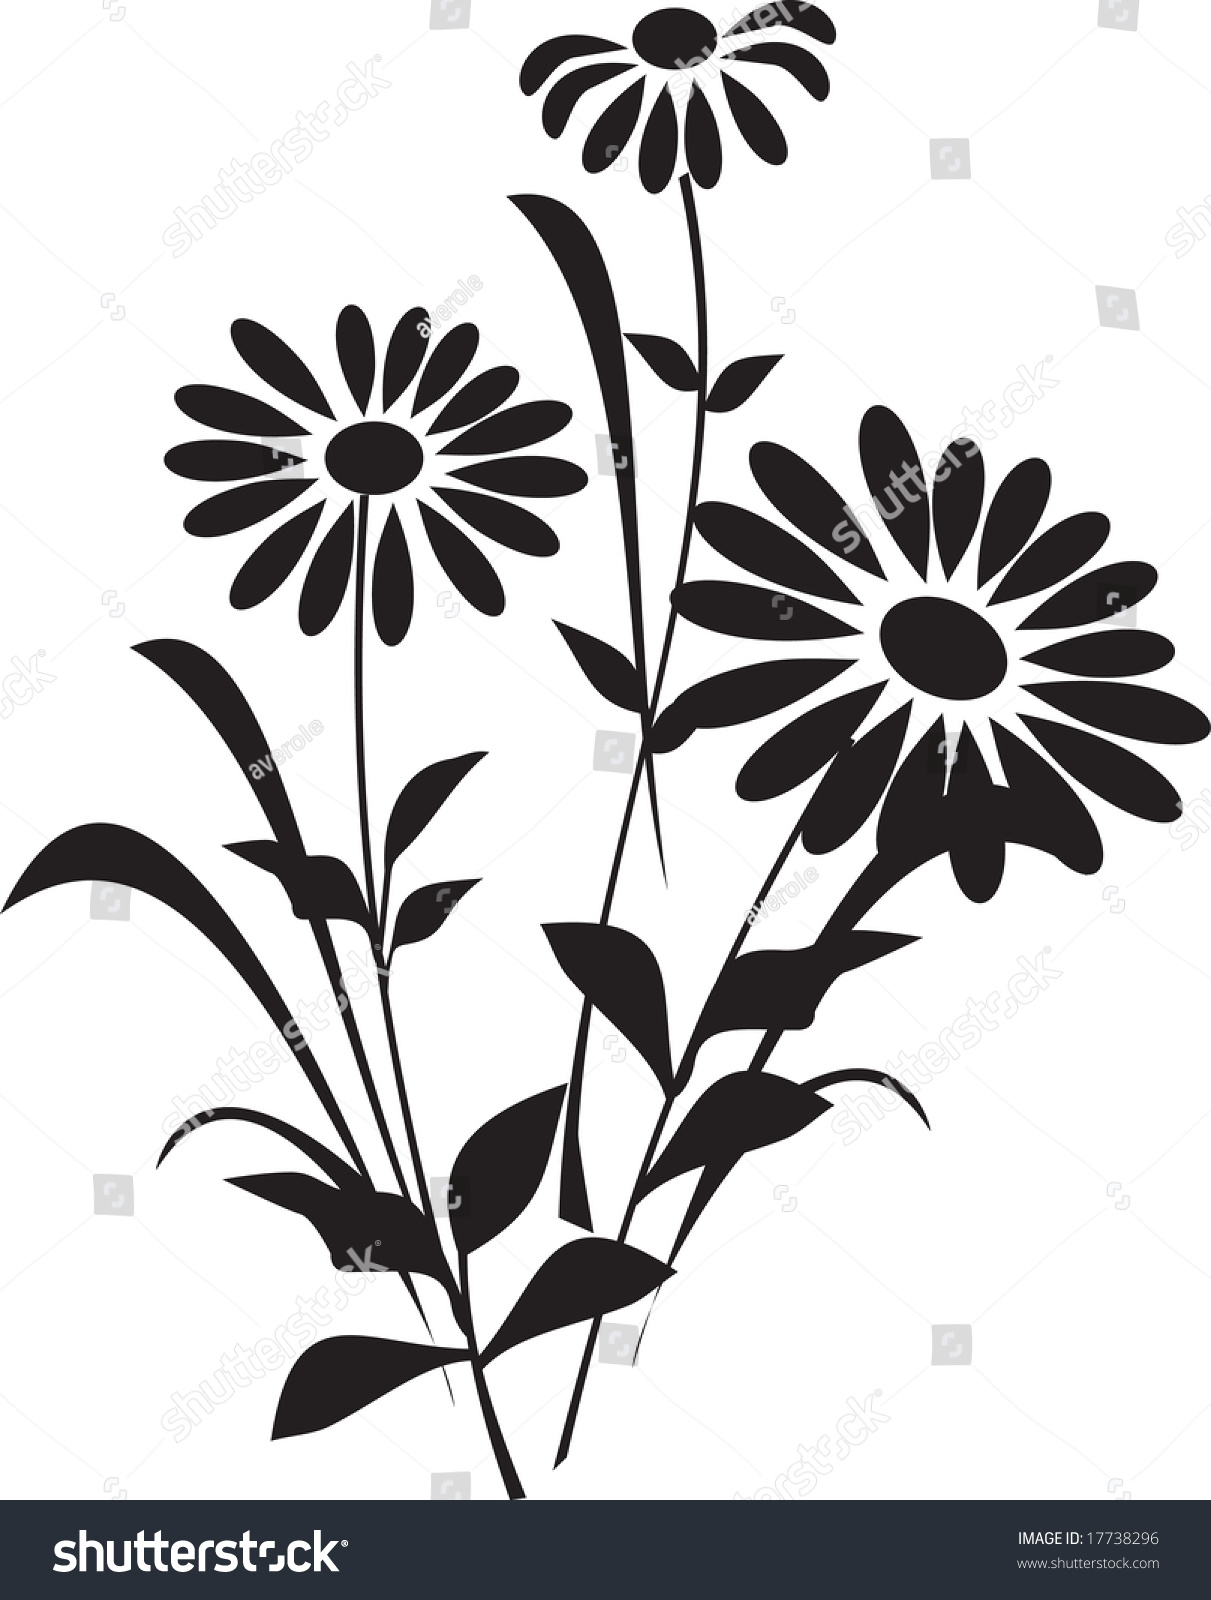 Download Flower Silhouette Stock Vector Royalty Free 17738296